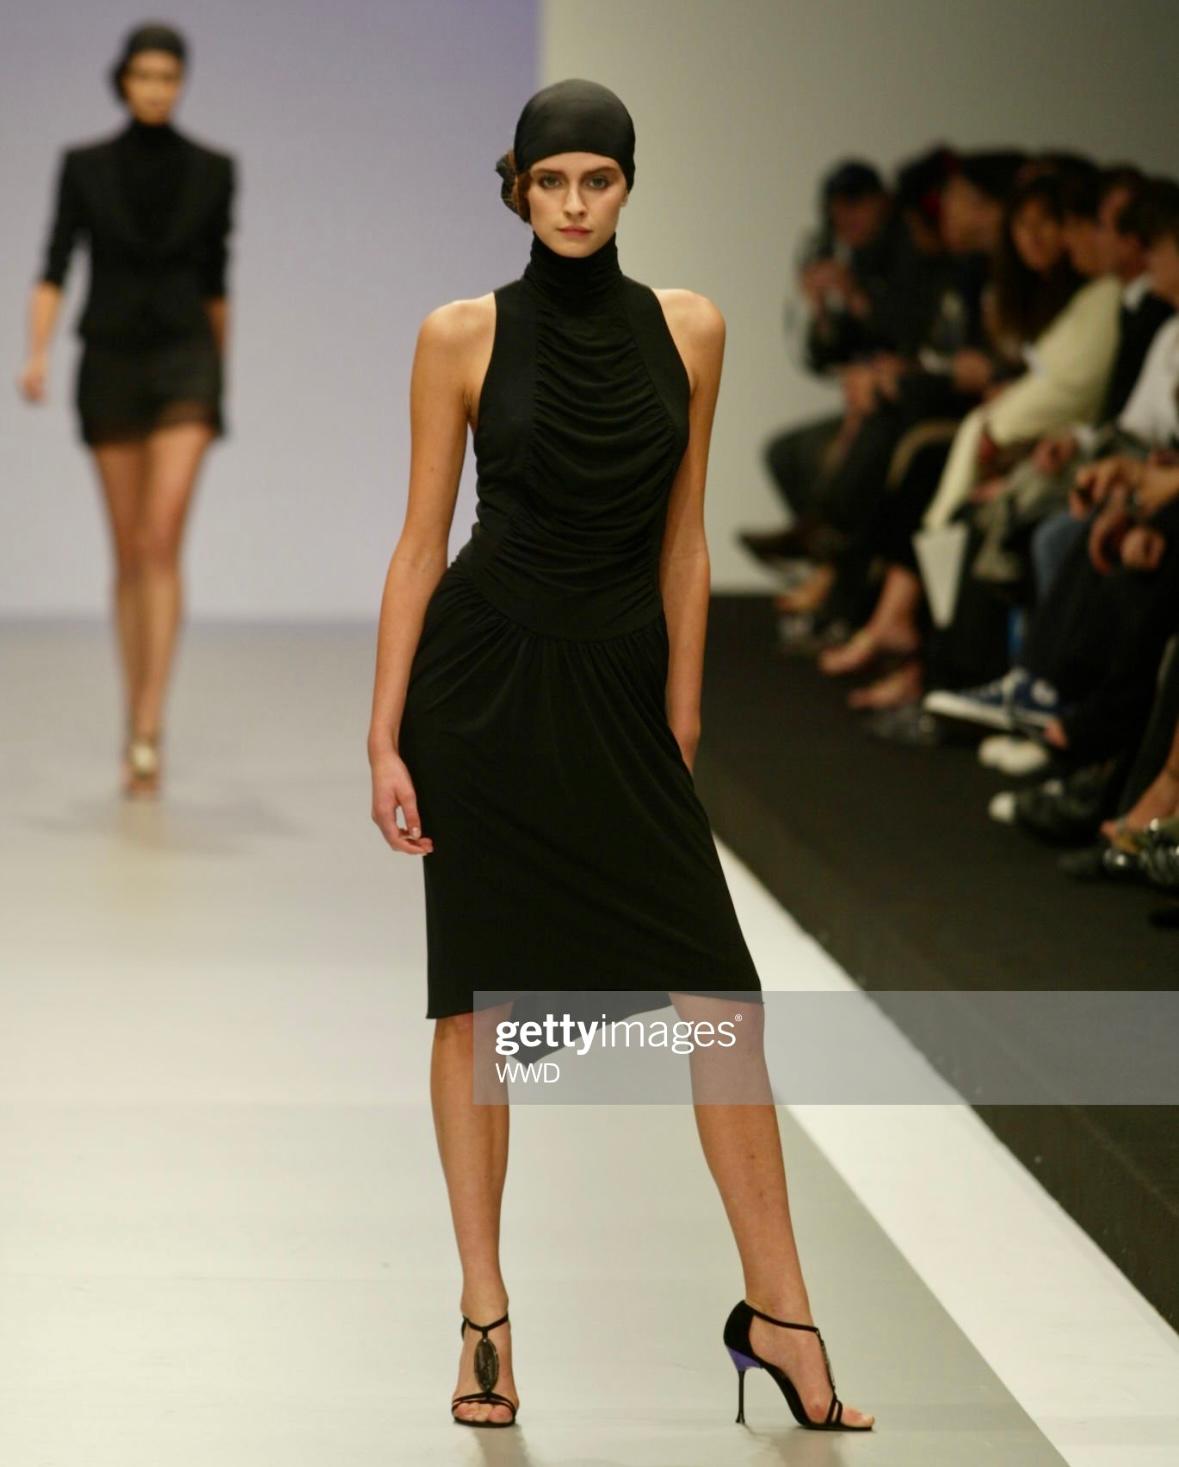 Presenting a chic black halterneck Karl Lagerfeld midi dress. From his Spring/Summer 2003 ready-to-wear collection, this dress debuted on the season's runway. Featuring a mock neck, draping at the front, and exposed back, this vintage runway dress